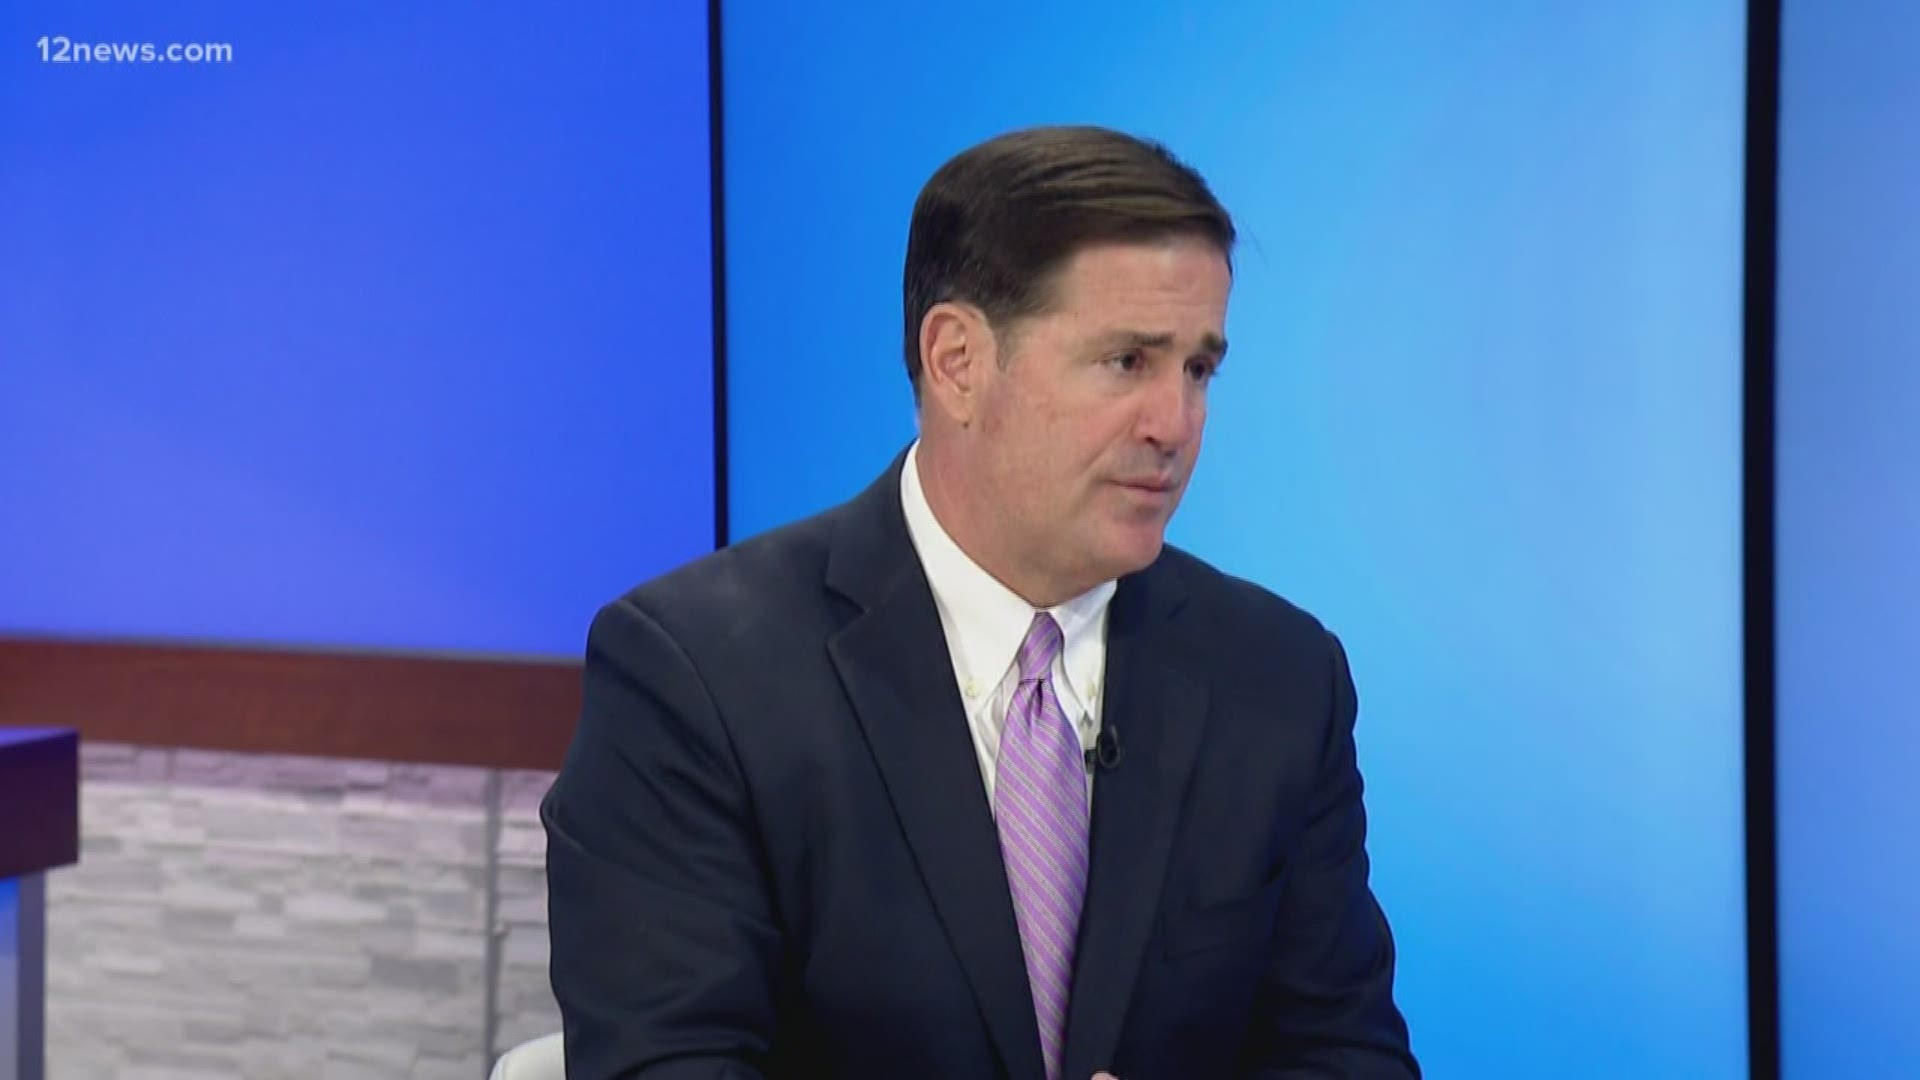 Arizona Gov. Doug Ducey said an impeachment may further divide Americans. He noted that early ballots will be mailed in 1 year for the presidential election.